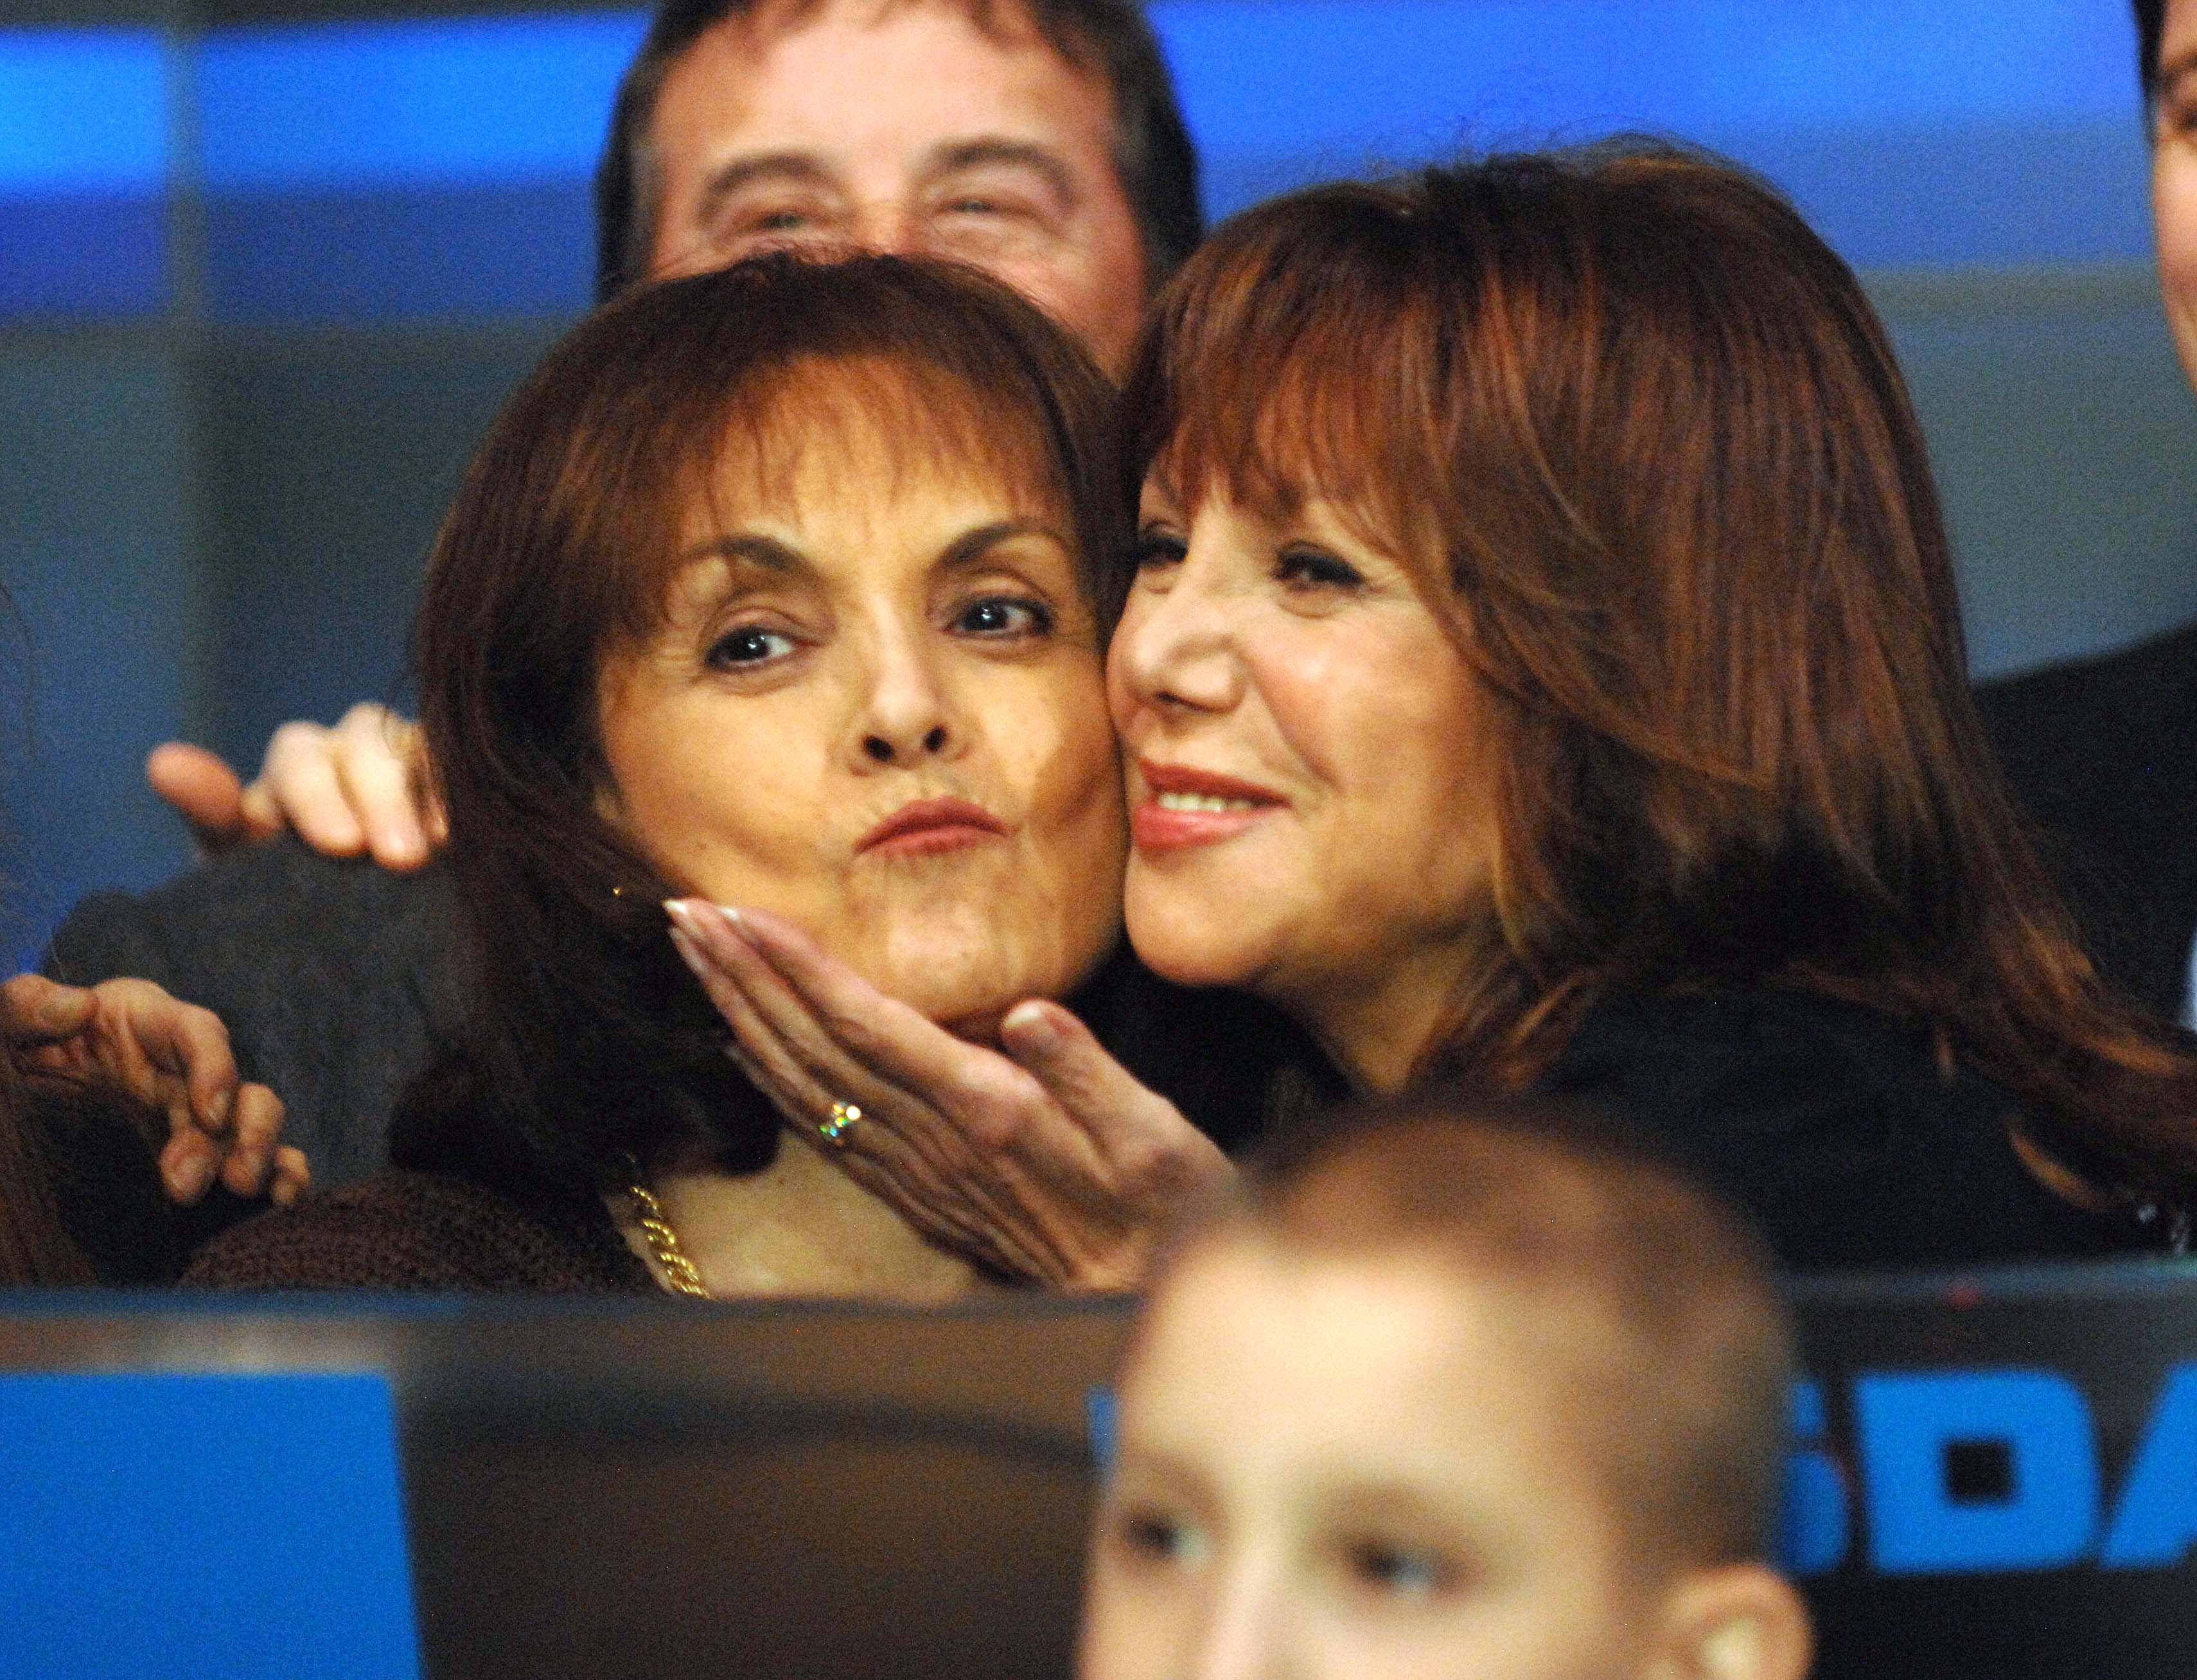 Terre Thomas and actress Marlo Thomas close the NASDAQ for St. Jude Children's Research Hospital on November 19, 2007, in New York City | Source: Getty Images